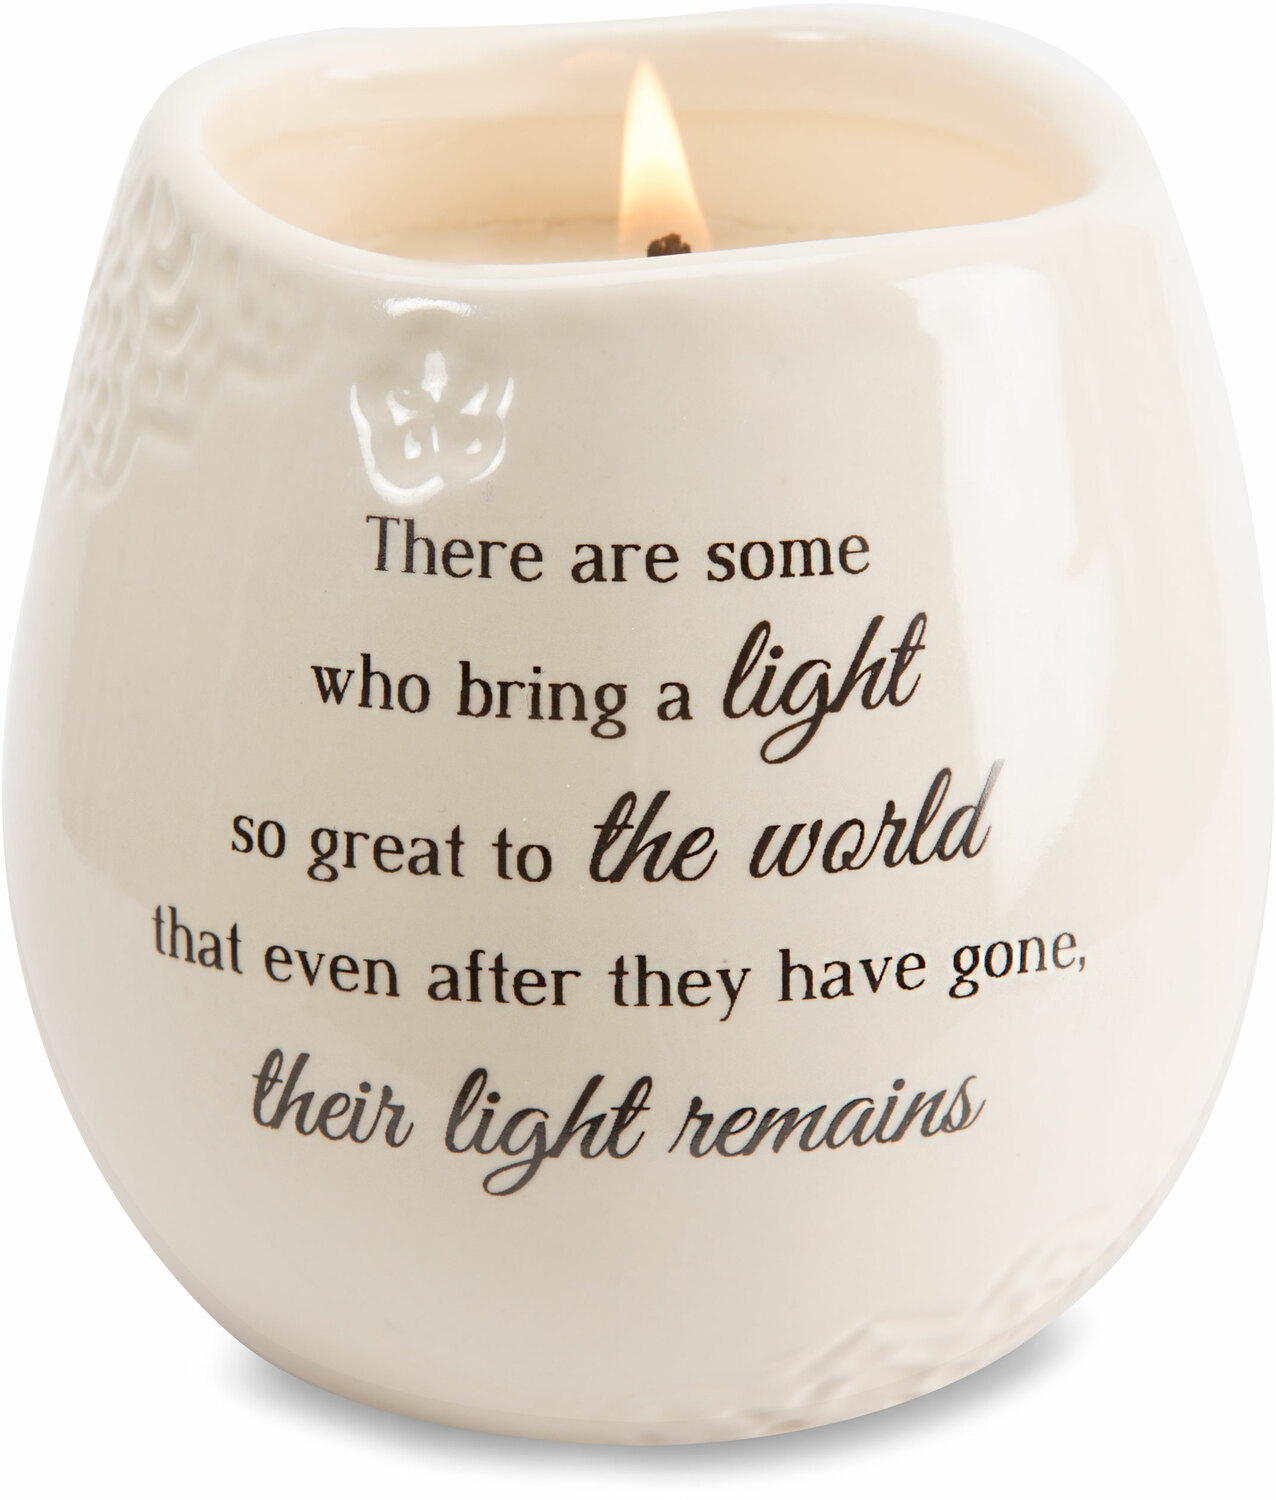 Light by Light Your Way Memorial - Light - 8 oz - 100% Soy Wax Candle
Scent: Tranquility